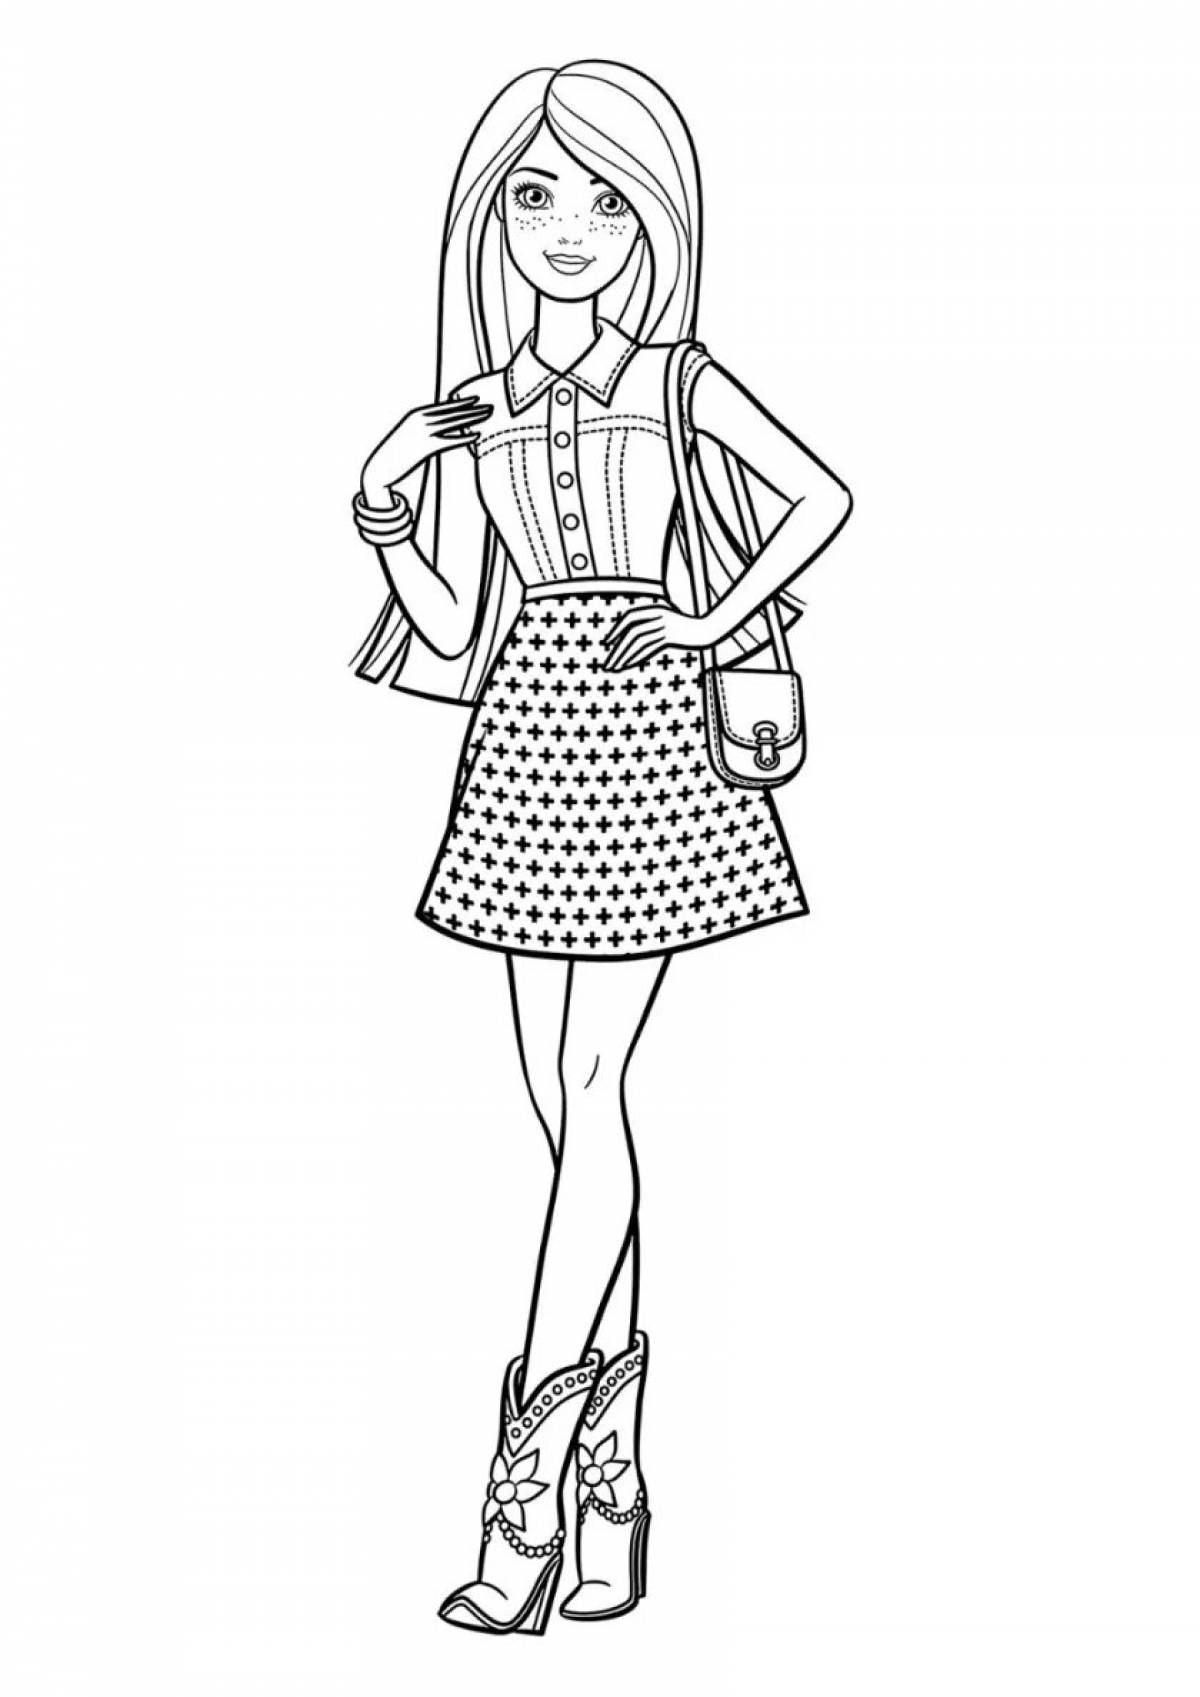 Sparkly barbie doll coloring pages